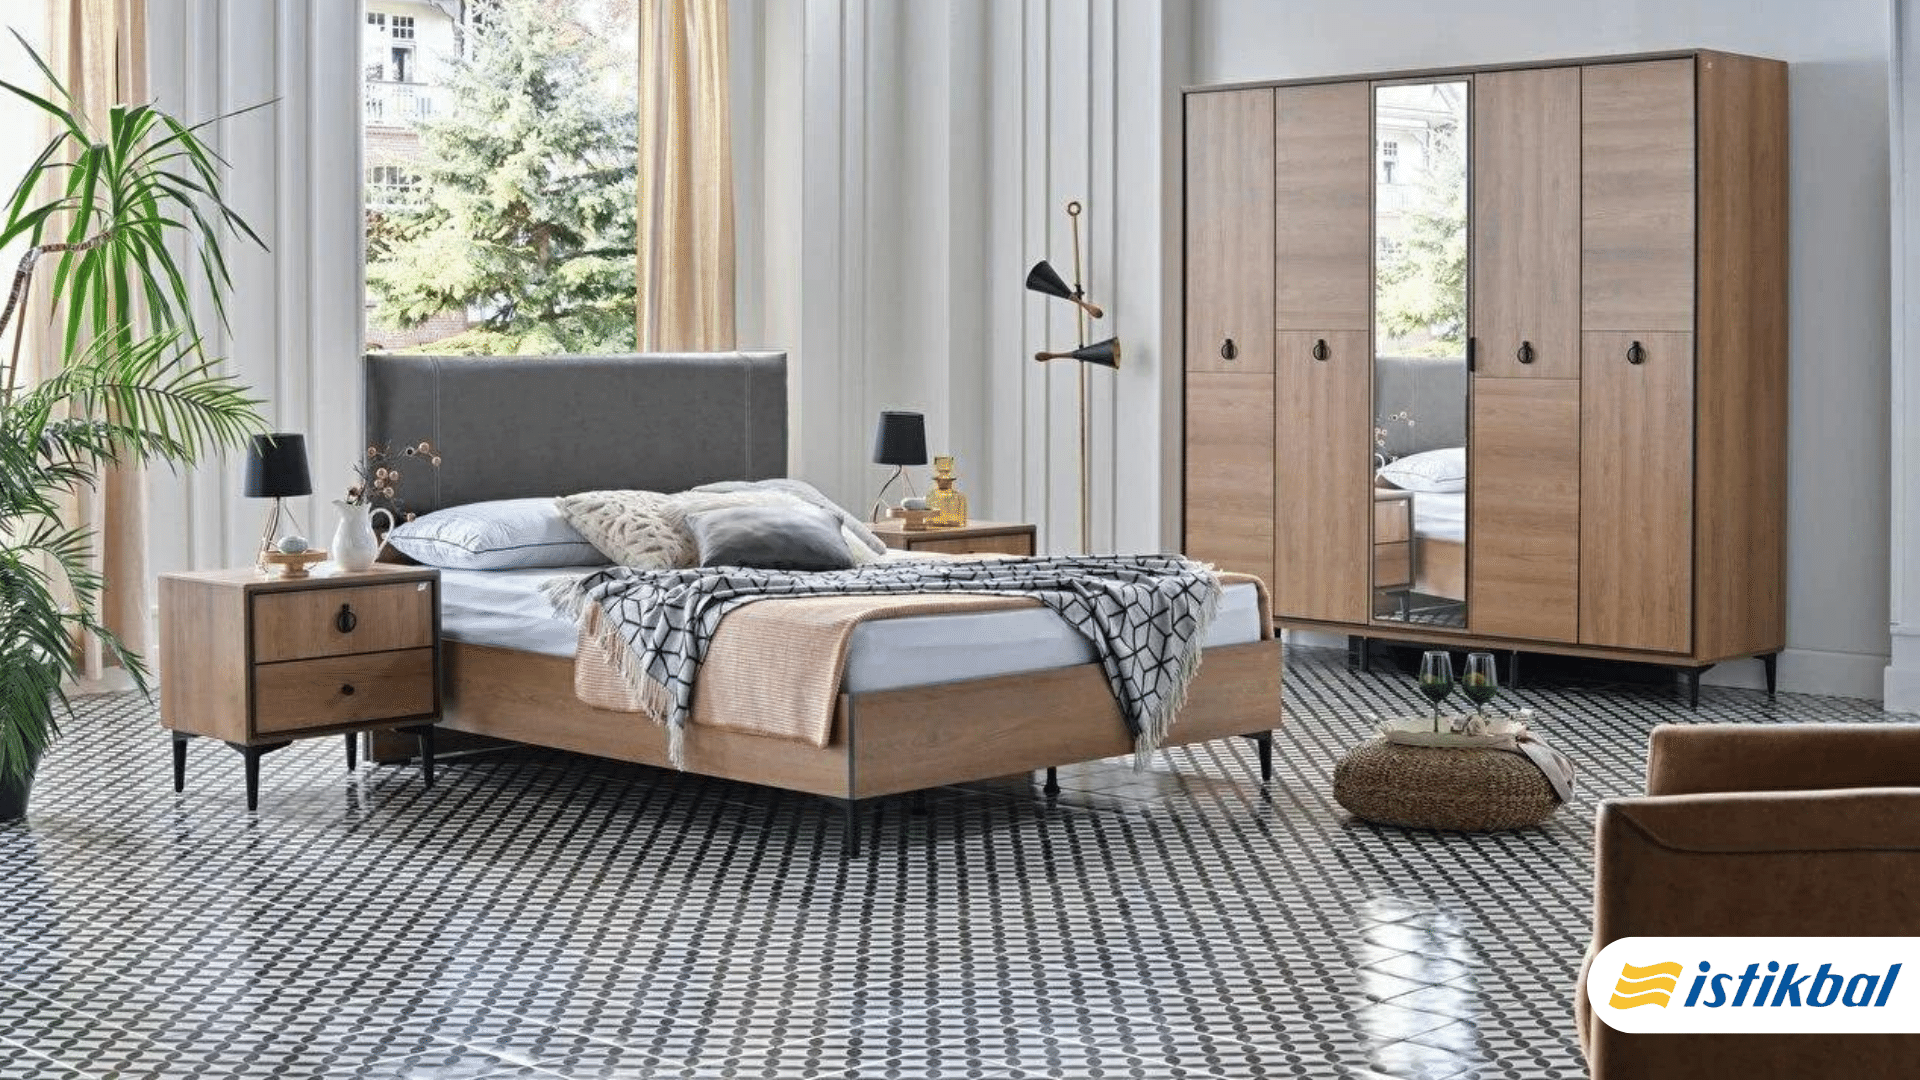 A Comprehensive Guide to Buying the Perfect Bedroom Set for Your Home